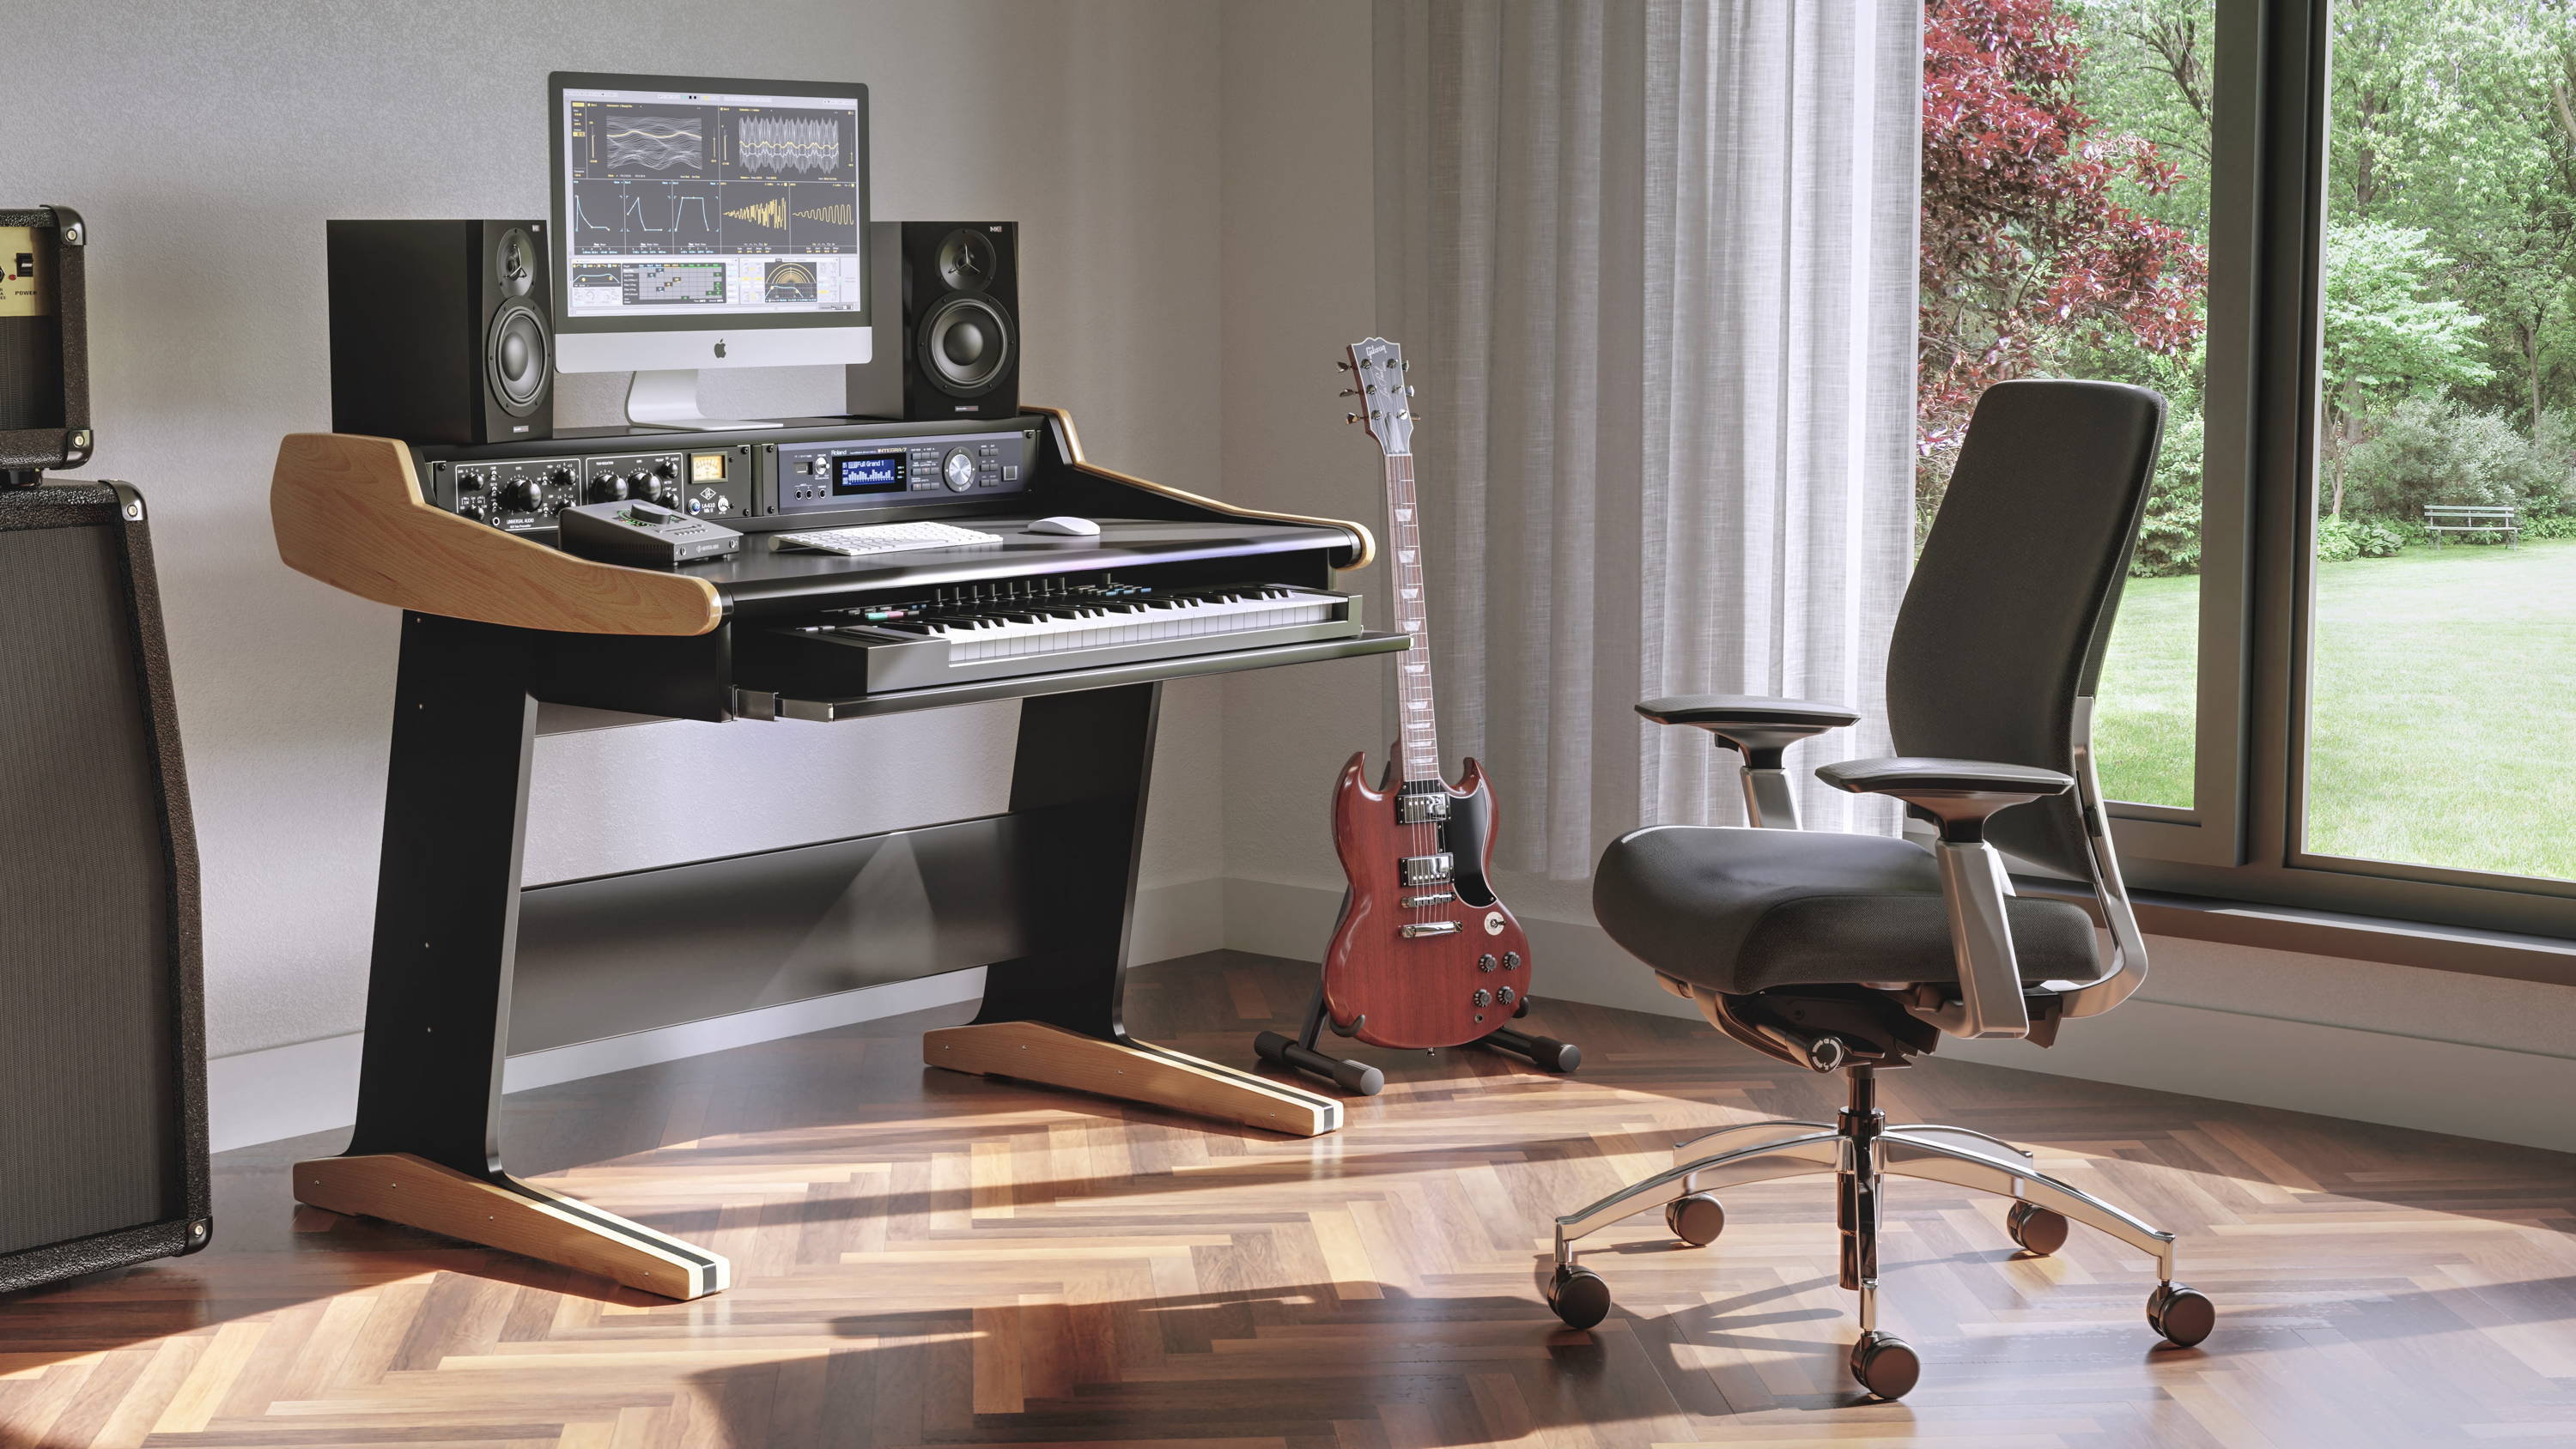 Buso Audio Buso Audio Studio Furniture For Music And Broadcast